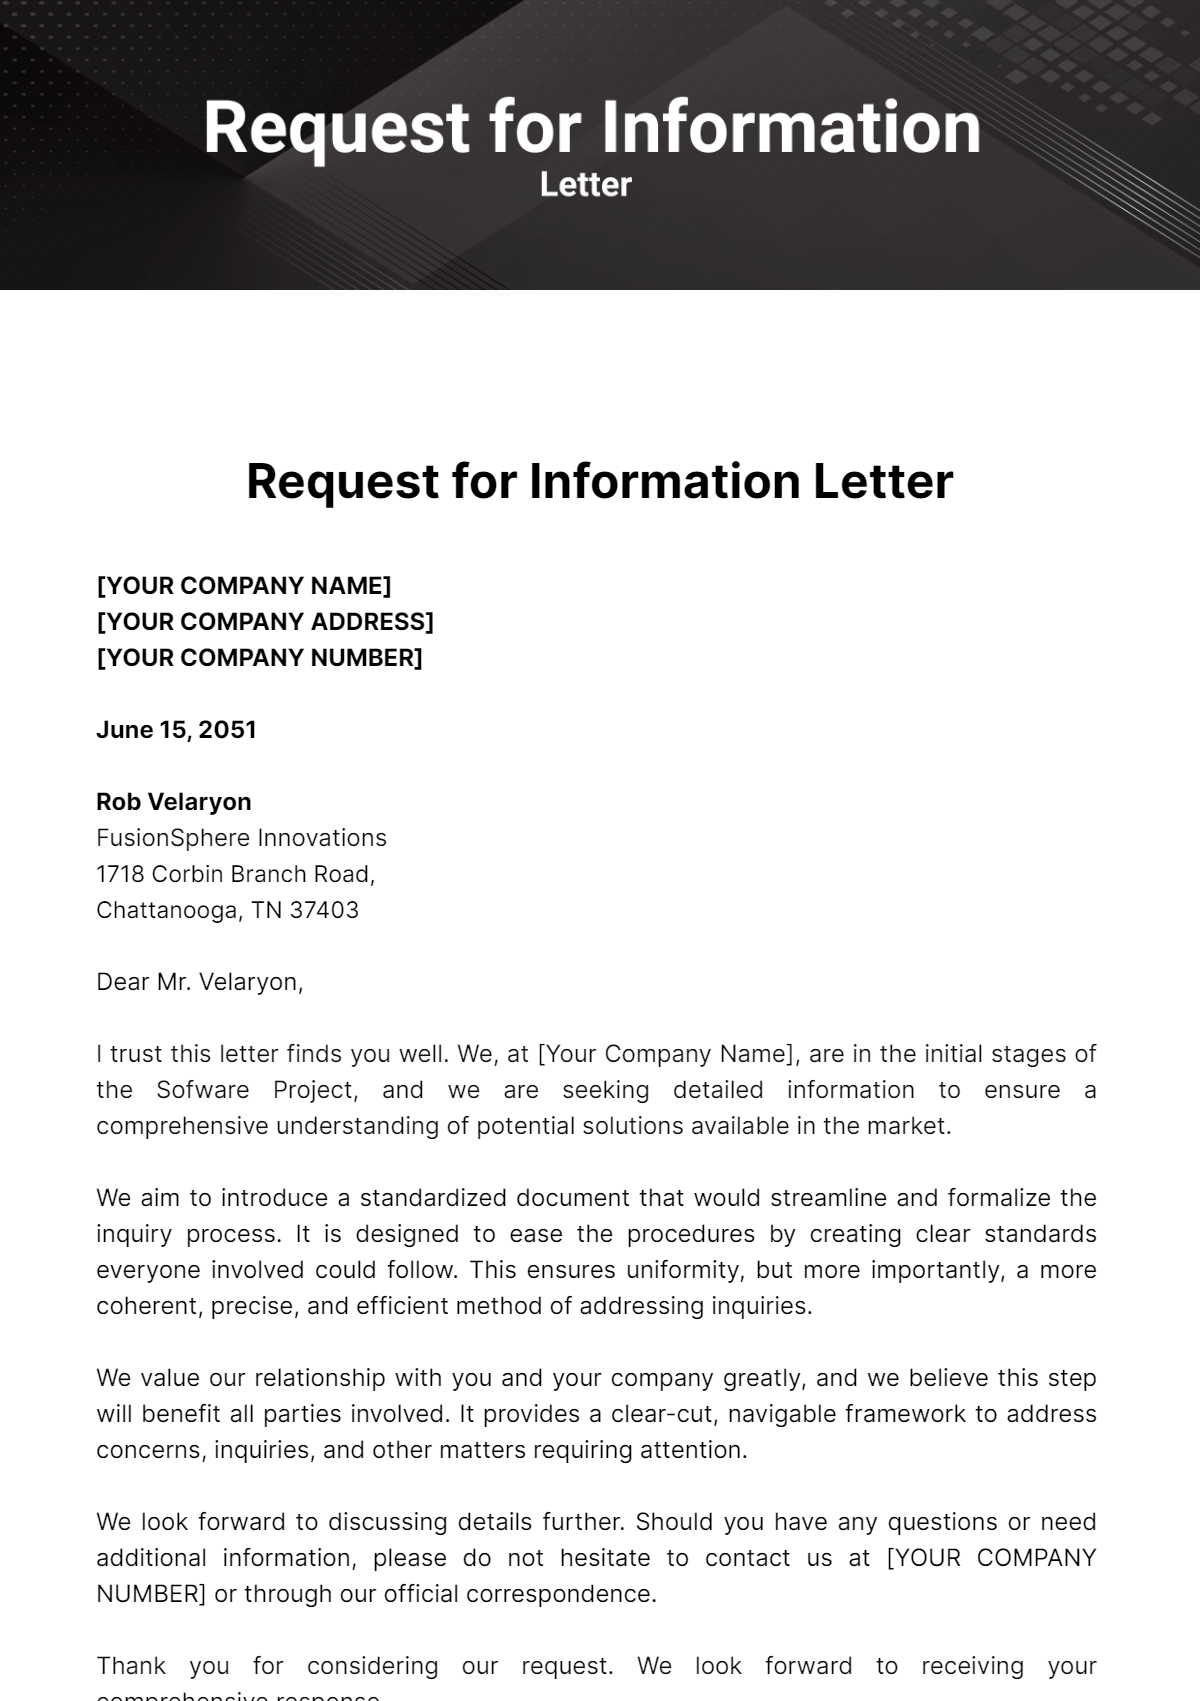 Free Request for Information Letter Template